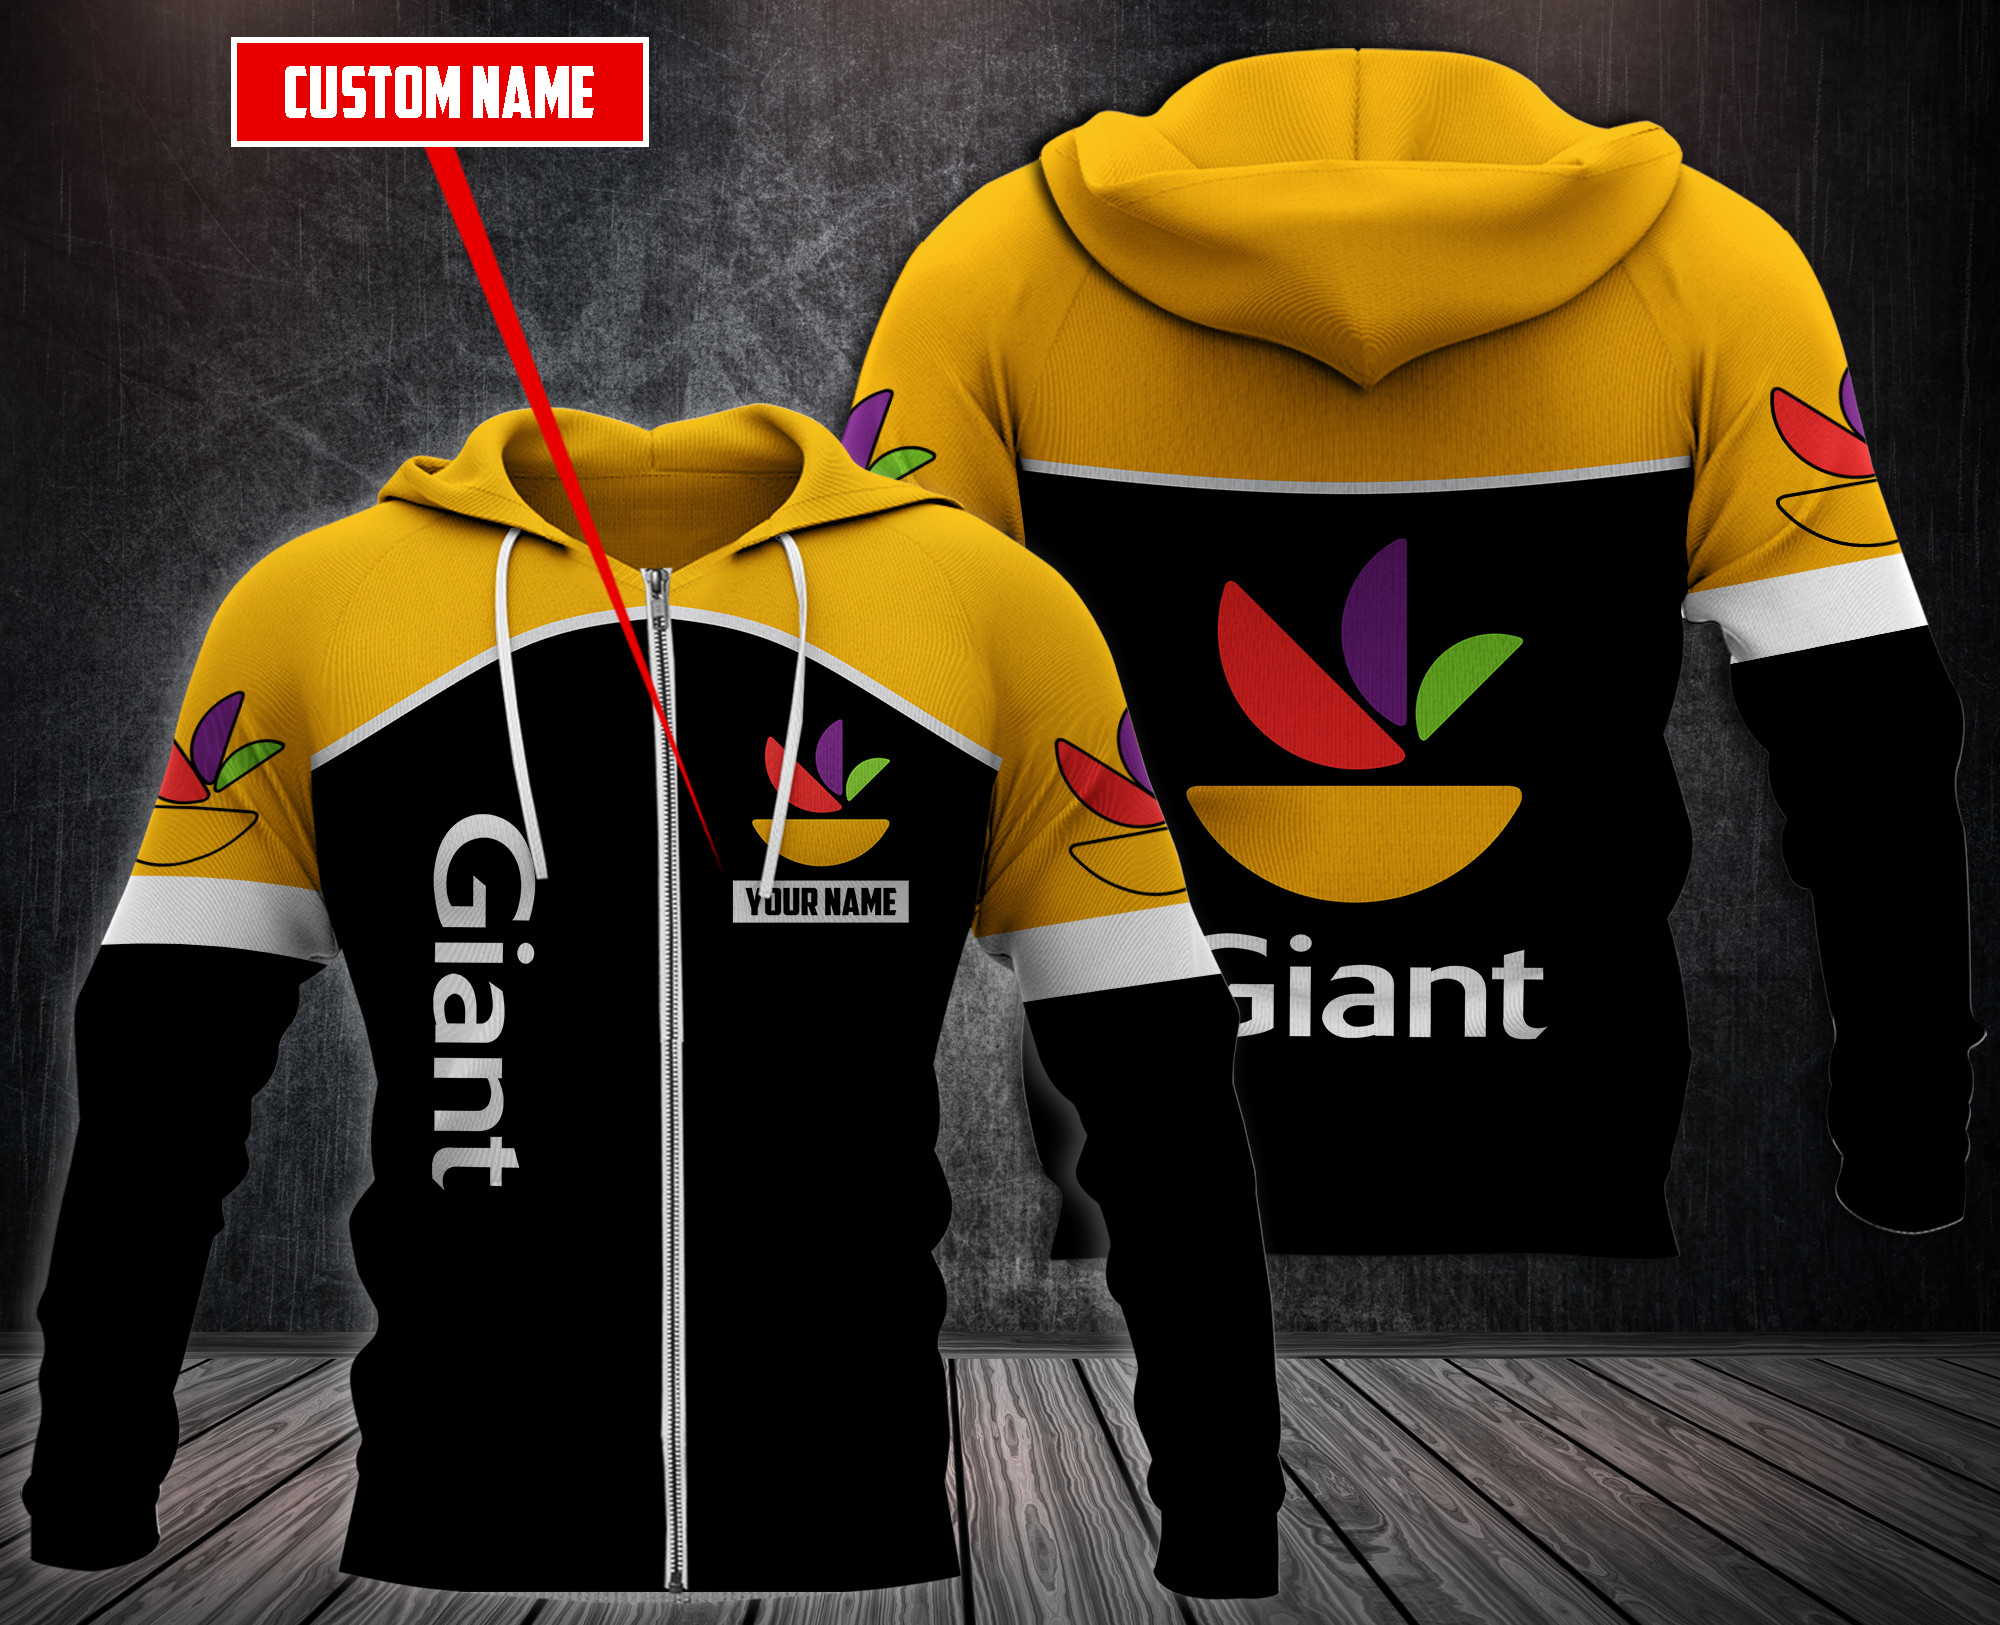 Choose the right hoodies for you on our boxboxshirt and ethershirt websites in 2022 38